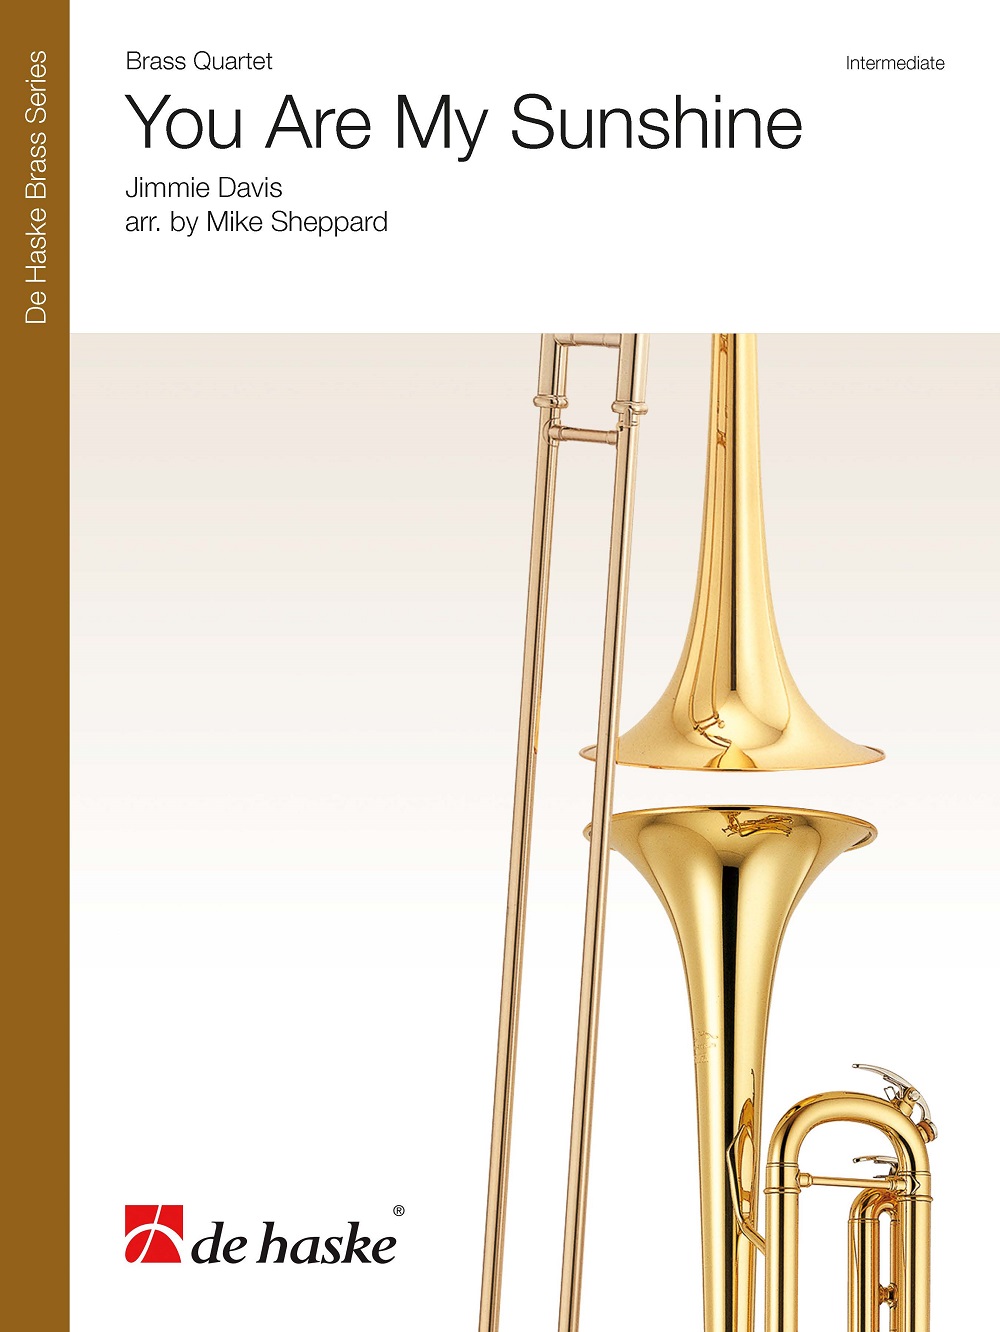 Jimmie Davis: You Are My Sunshine: Brass Ensemble: Score and Parts